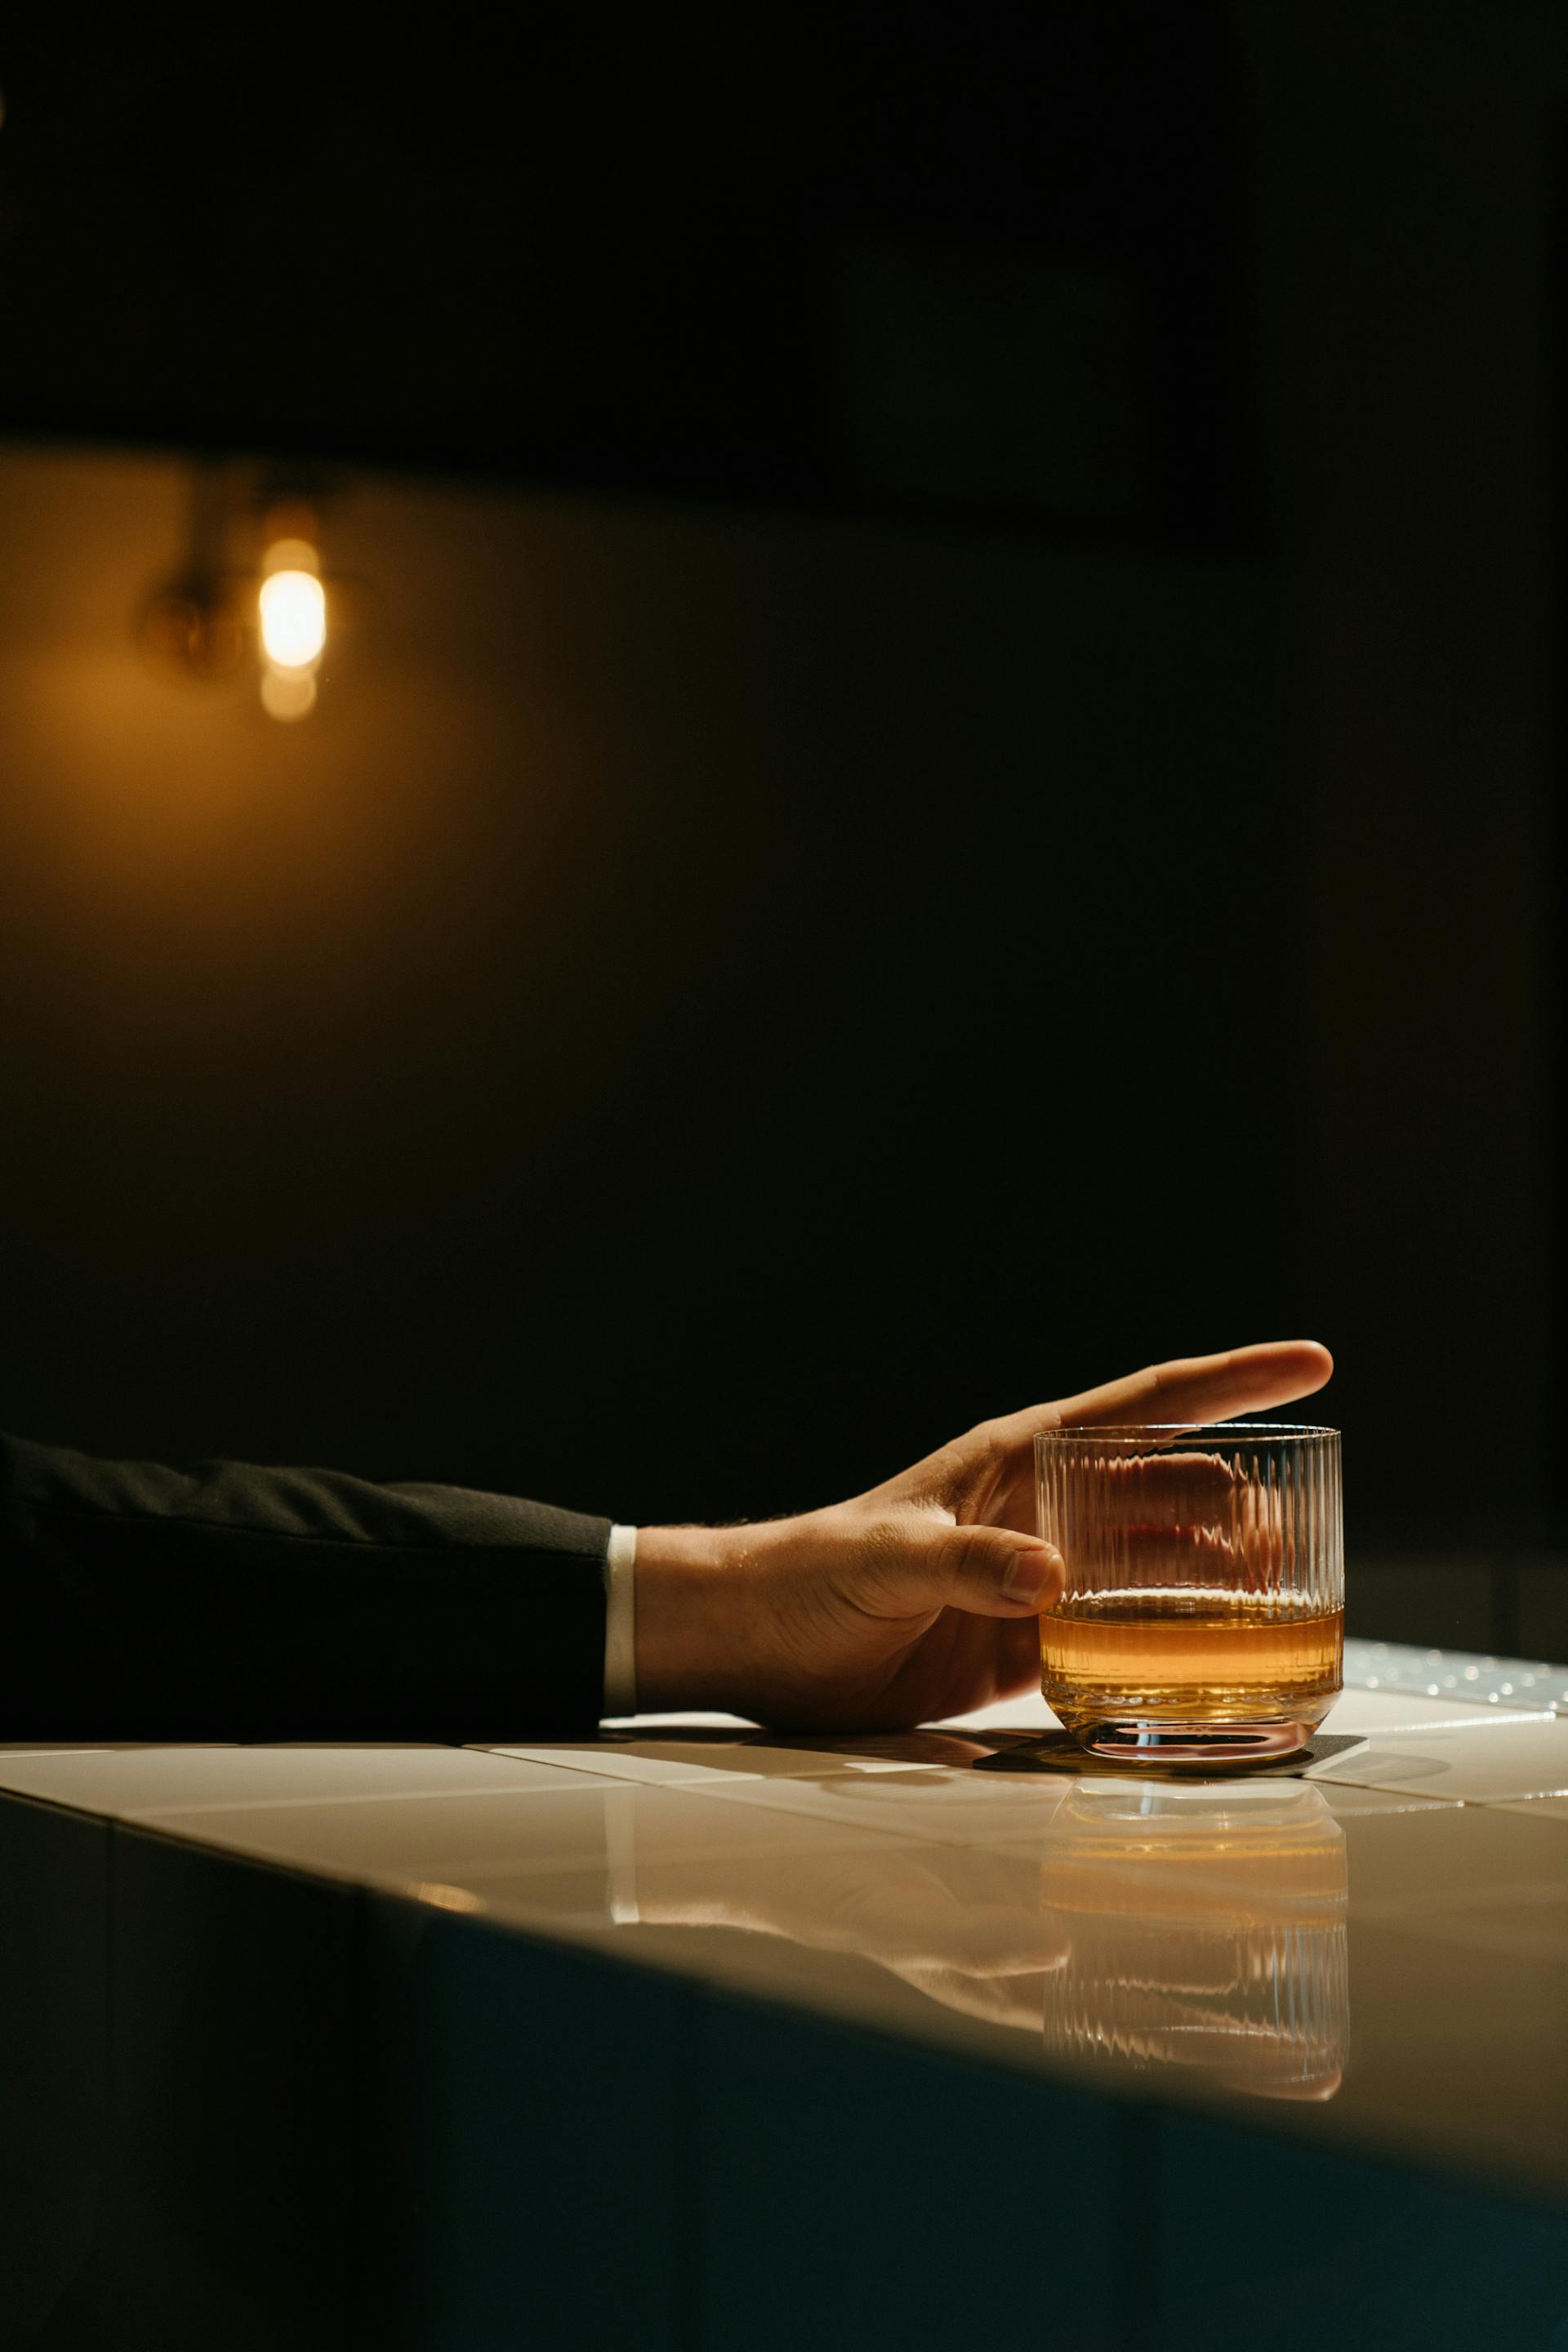 A man holding a glass of whiskey | Source: Pexels